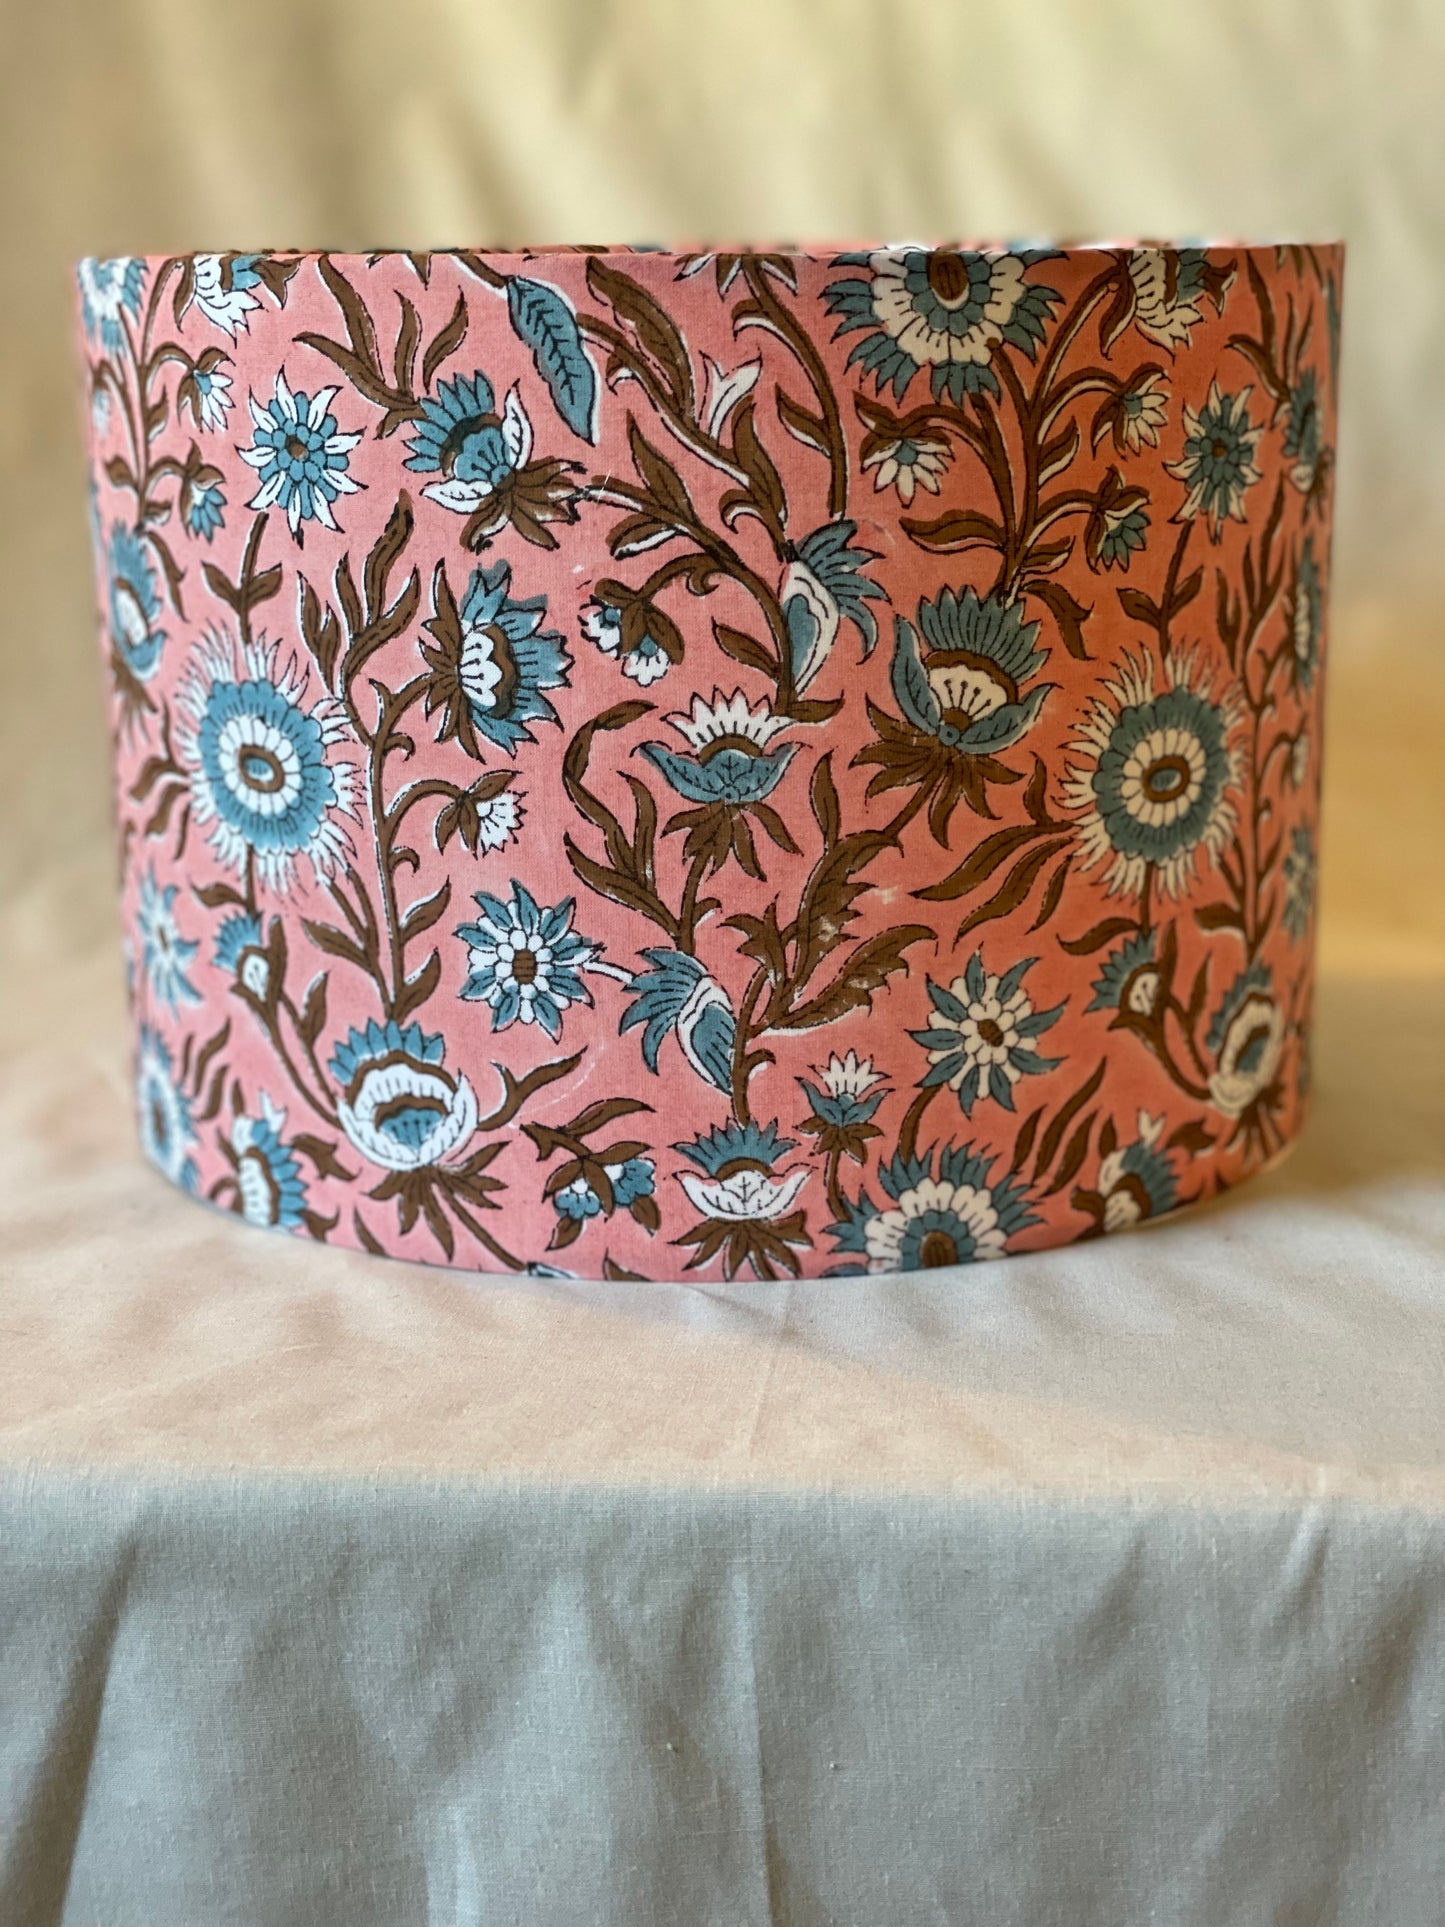 10 inch Drum Lampshade. Indian Block print from Jaipur. Rosy Pink with Brown and Cadet Blue Floral Motif.